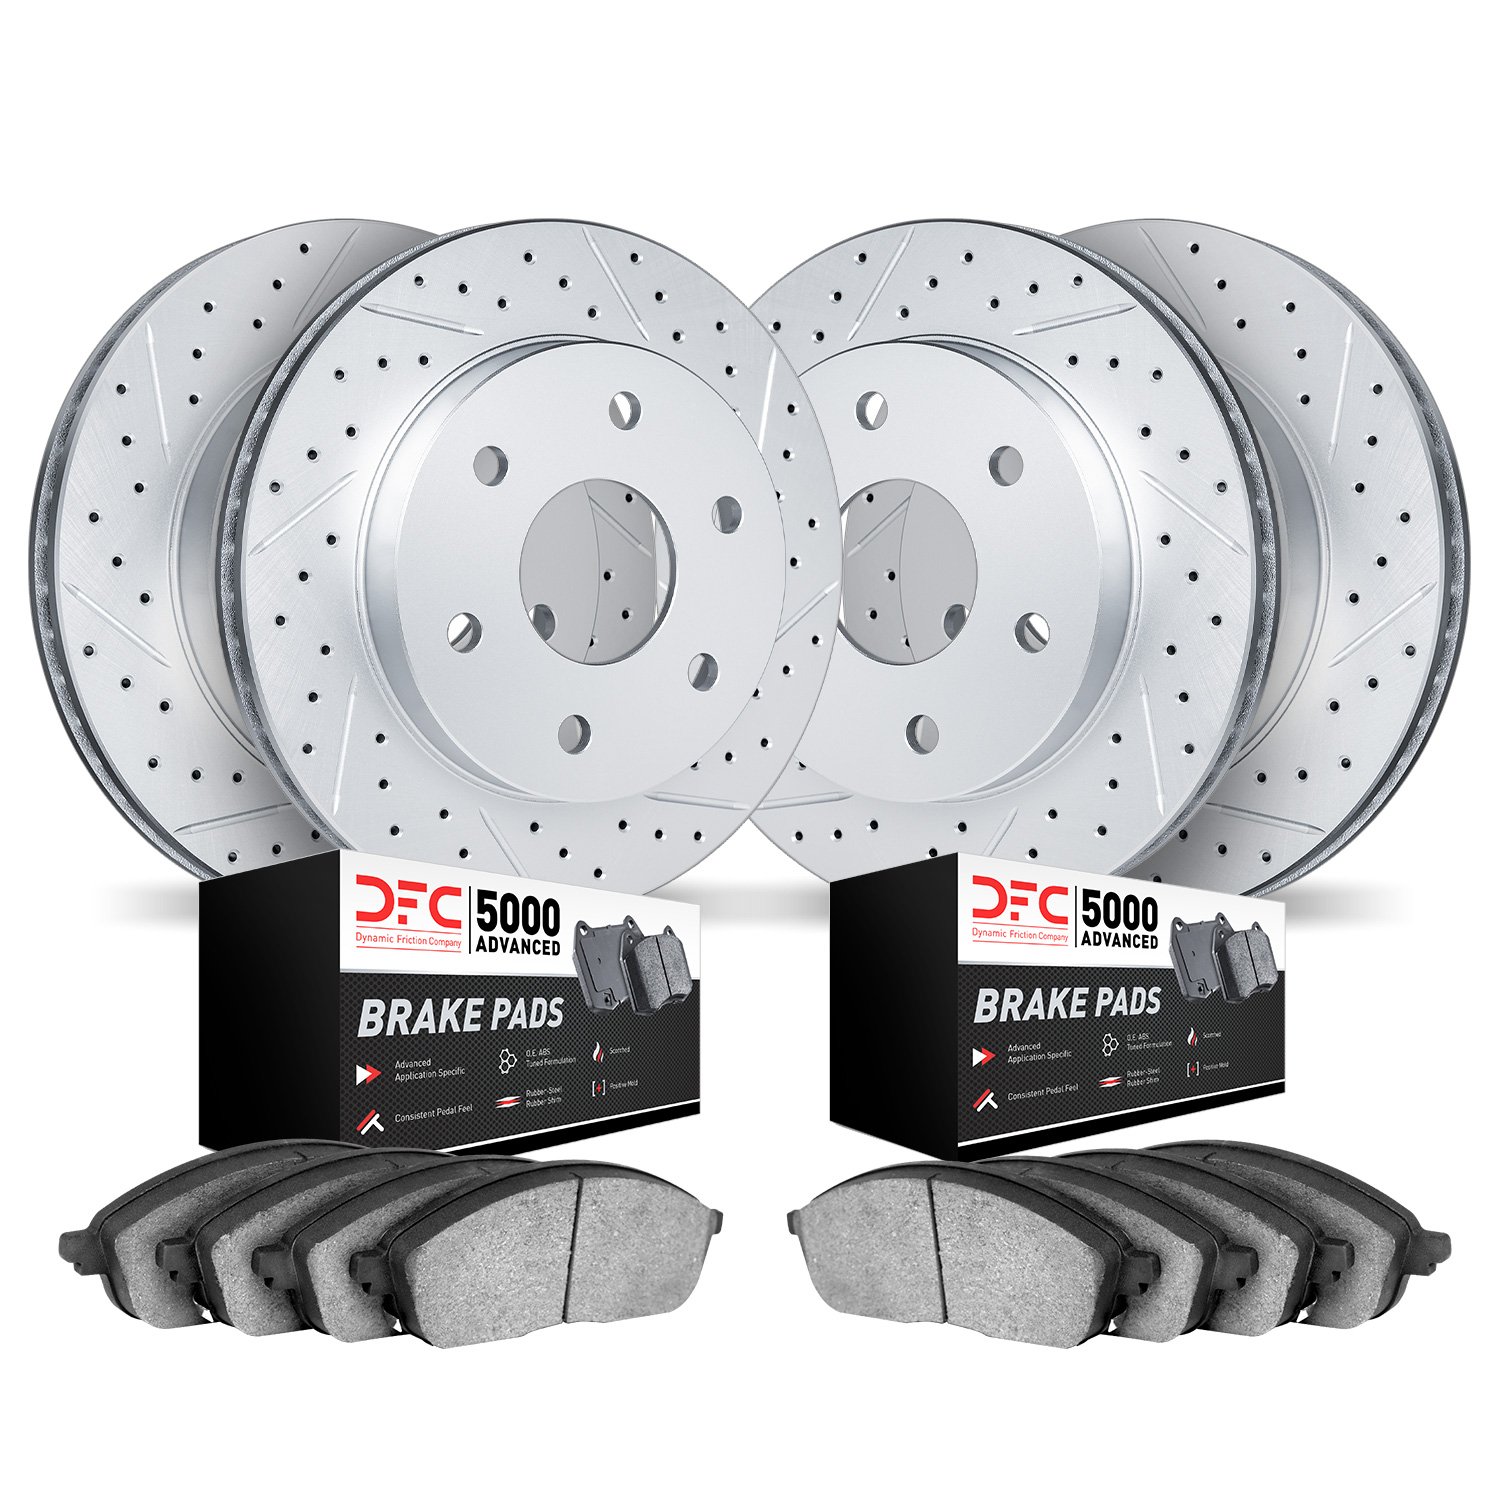 2504-48033 Geoperformance Drilled/Slotted Rotors w/5000 Advanced Brake Pads Kit, 2006-2009 GM, Position: Front and Rear